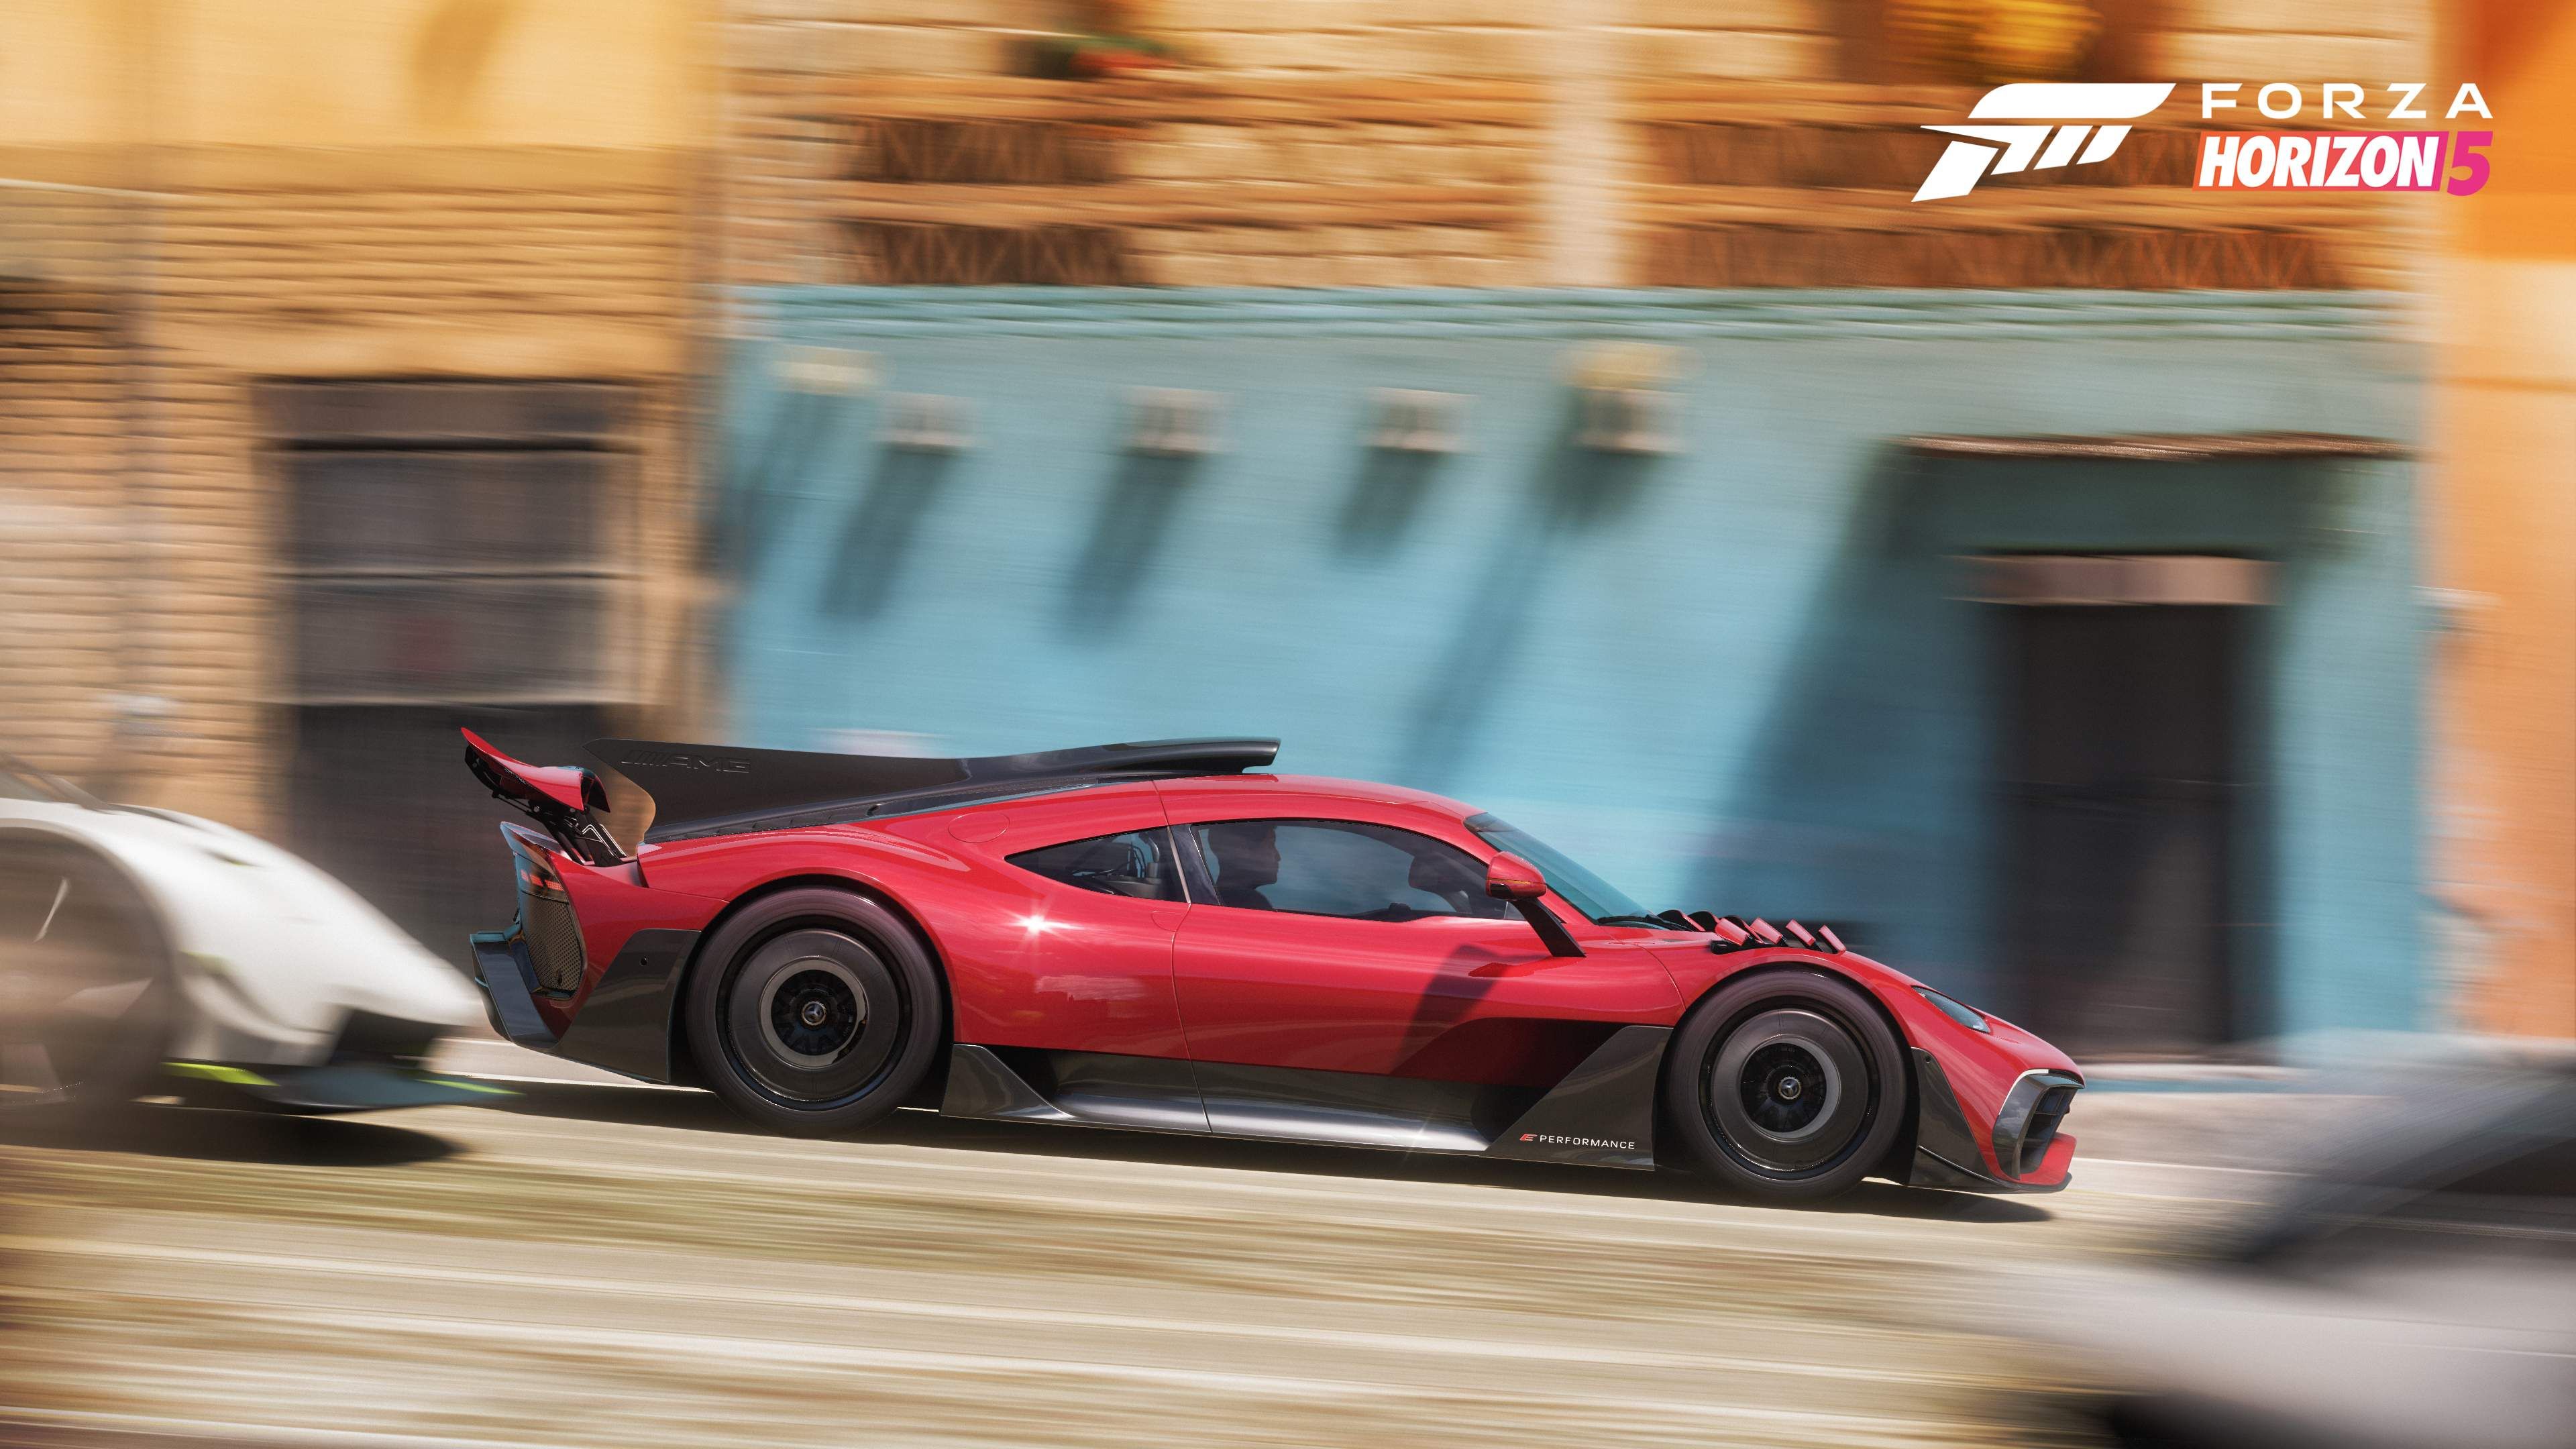 Images of car racing from Forza Horizon 5.